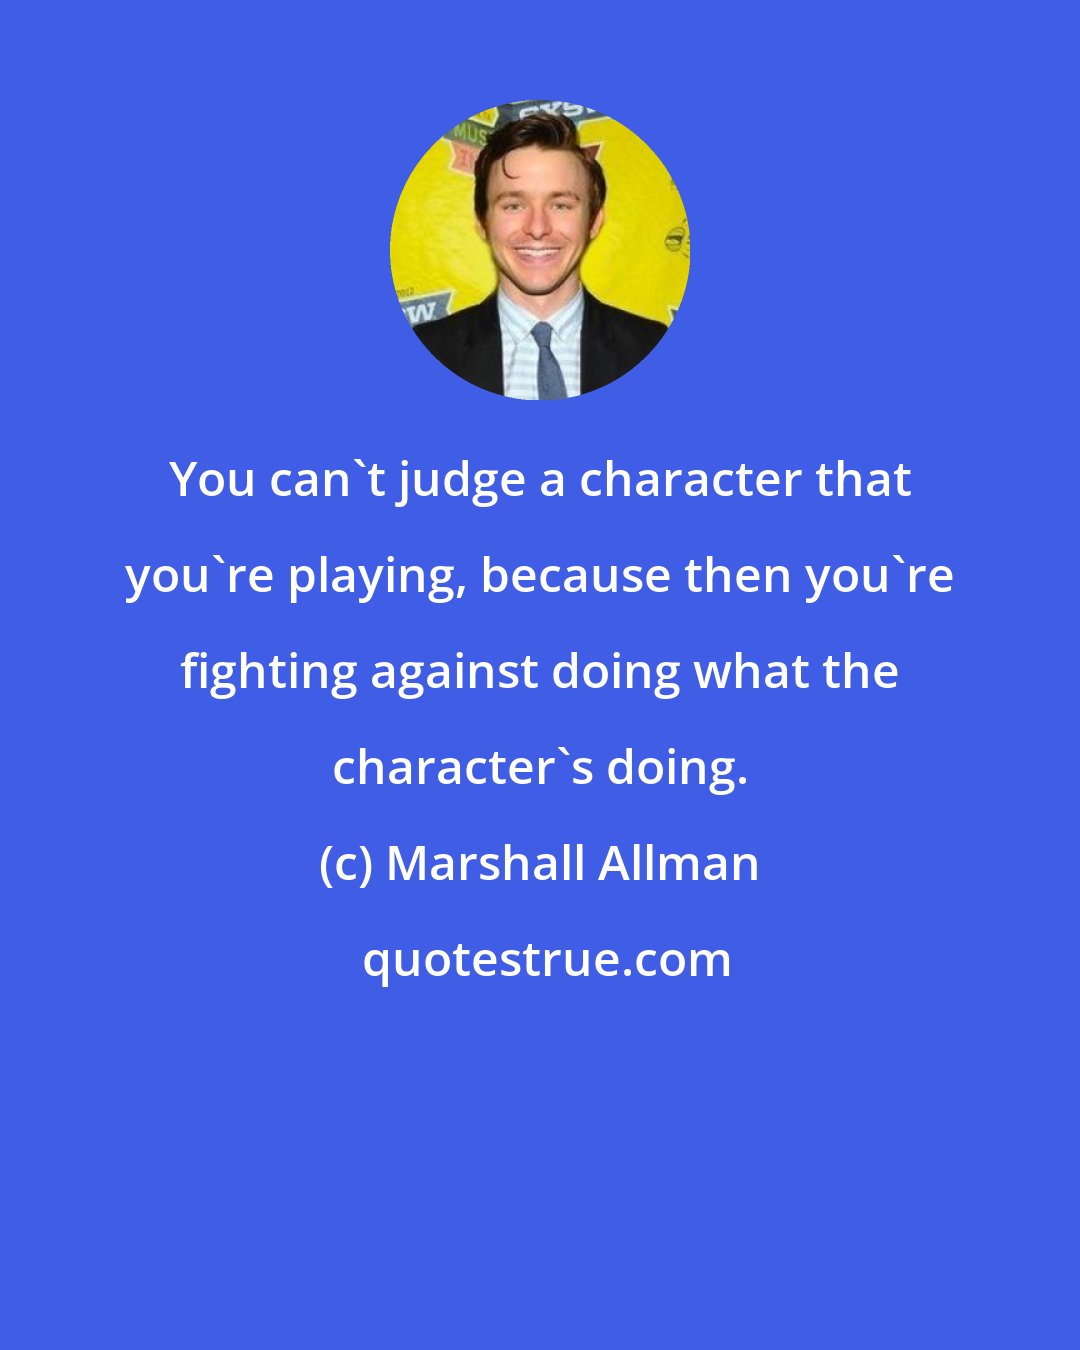 Marshall Allman: You can't judge a character that you're playing, because then you're fighting against doing what the character's doing.